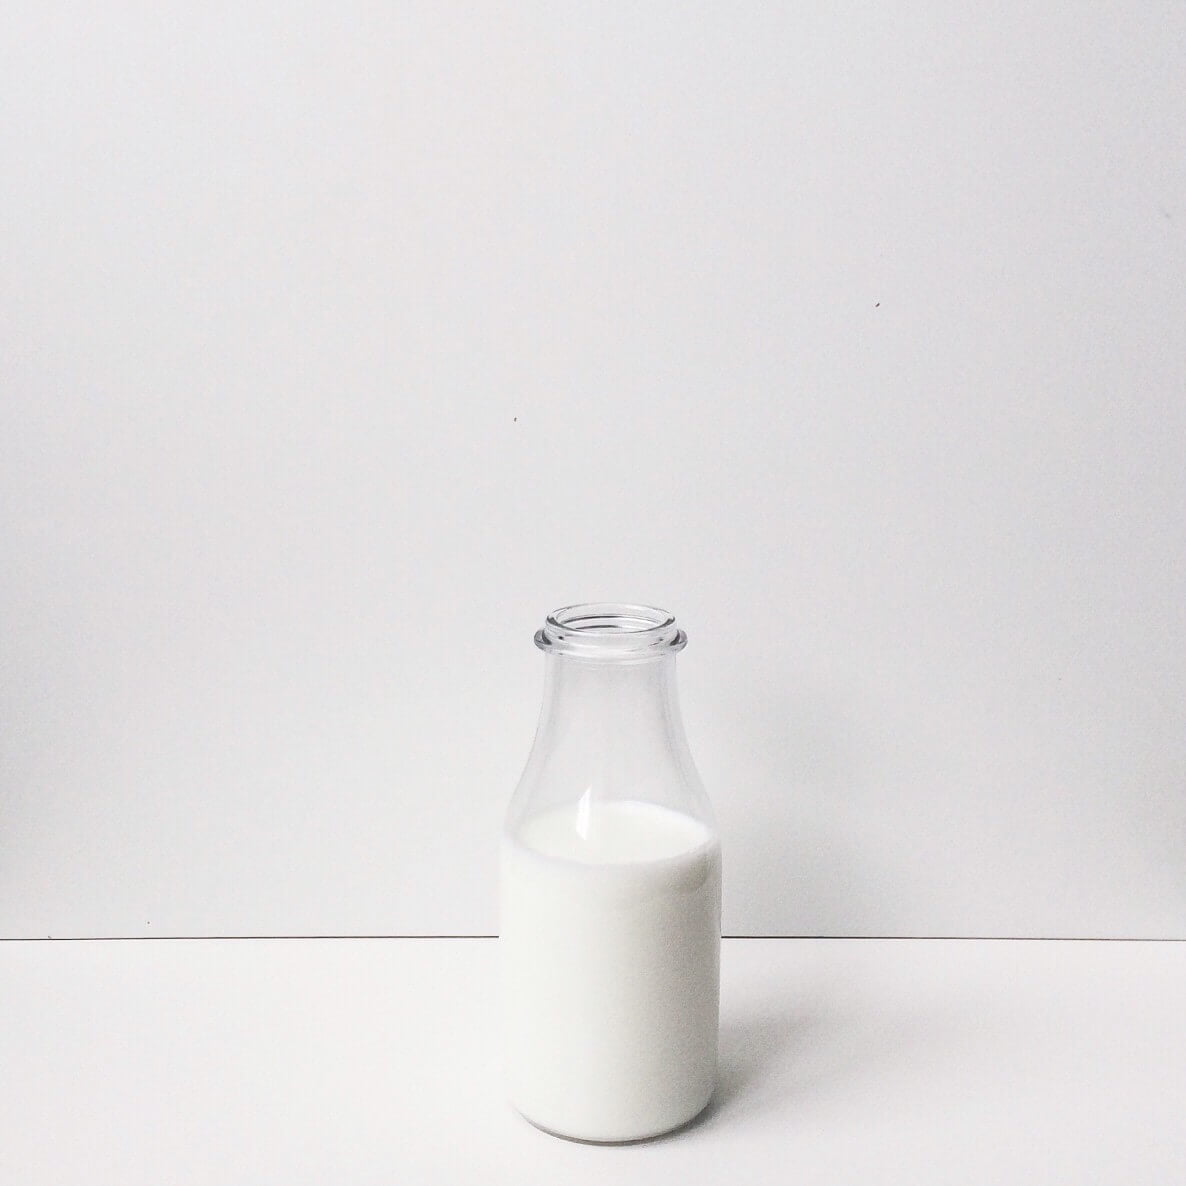 bottle of milk on table with white background